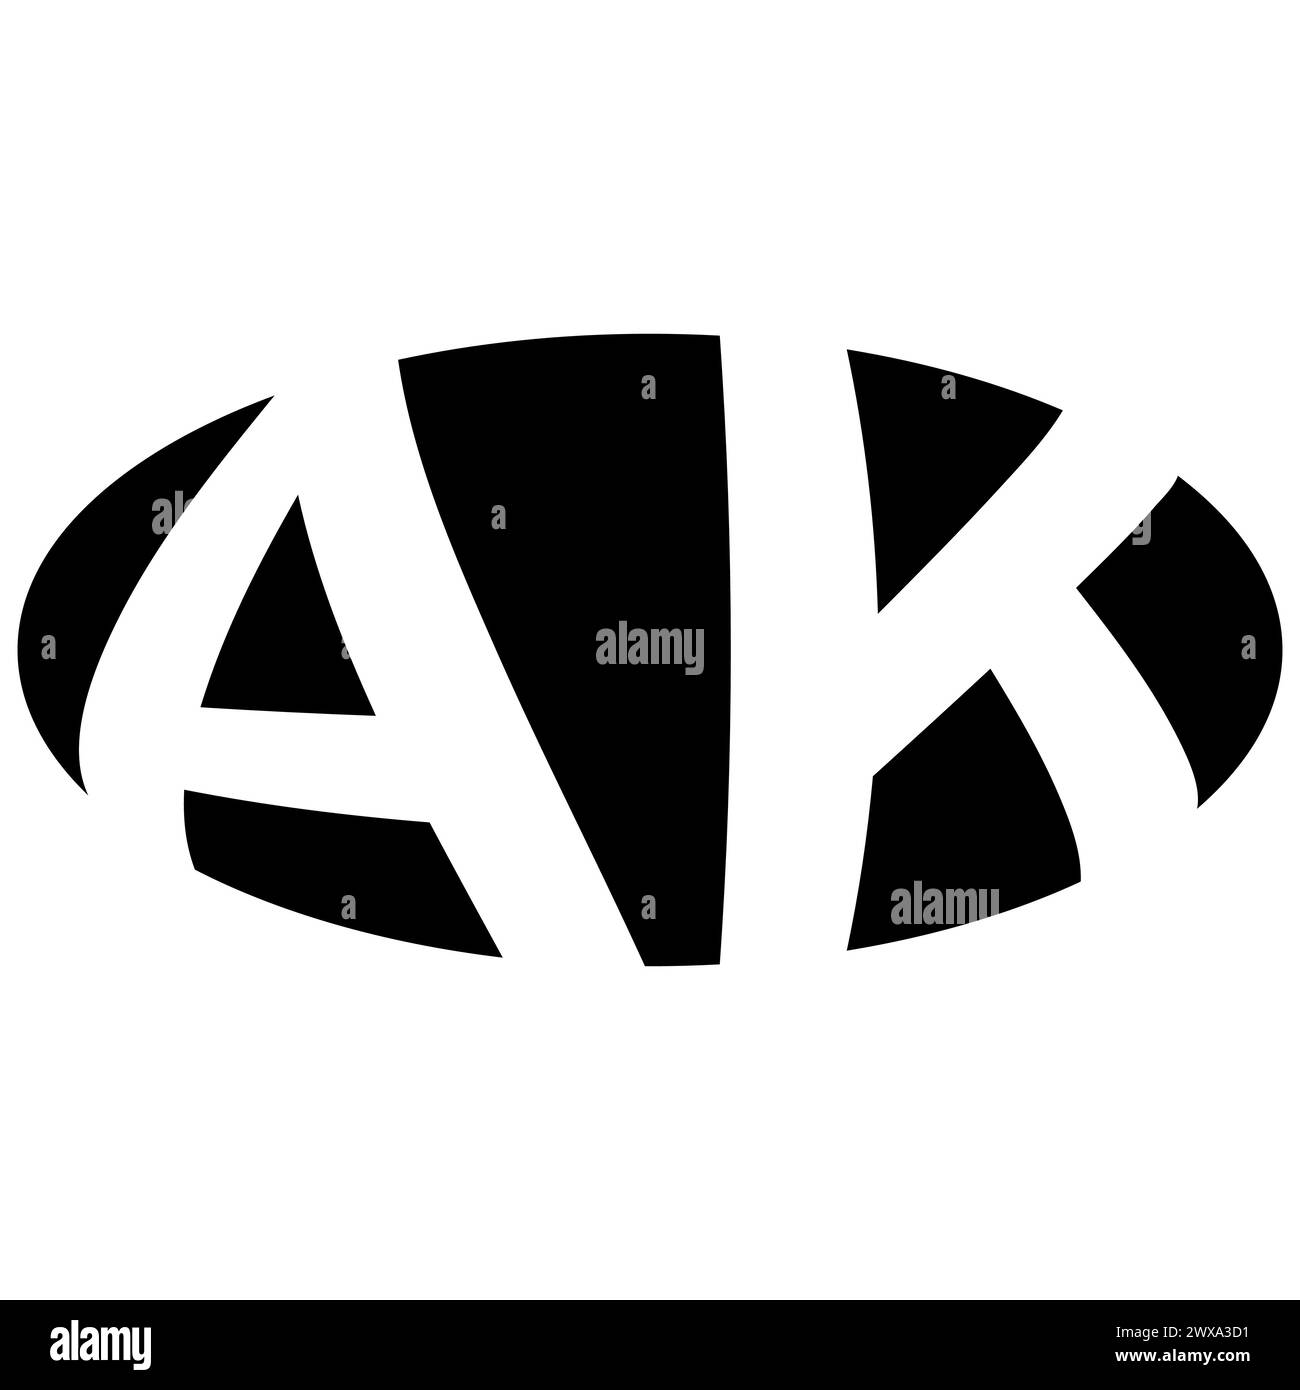 Oval logo double letter A K two letters ak ka Stock Vector